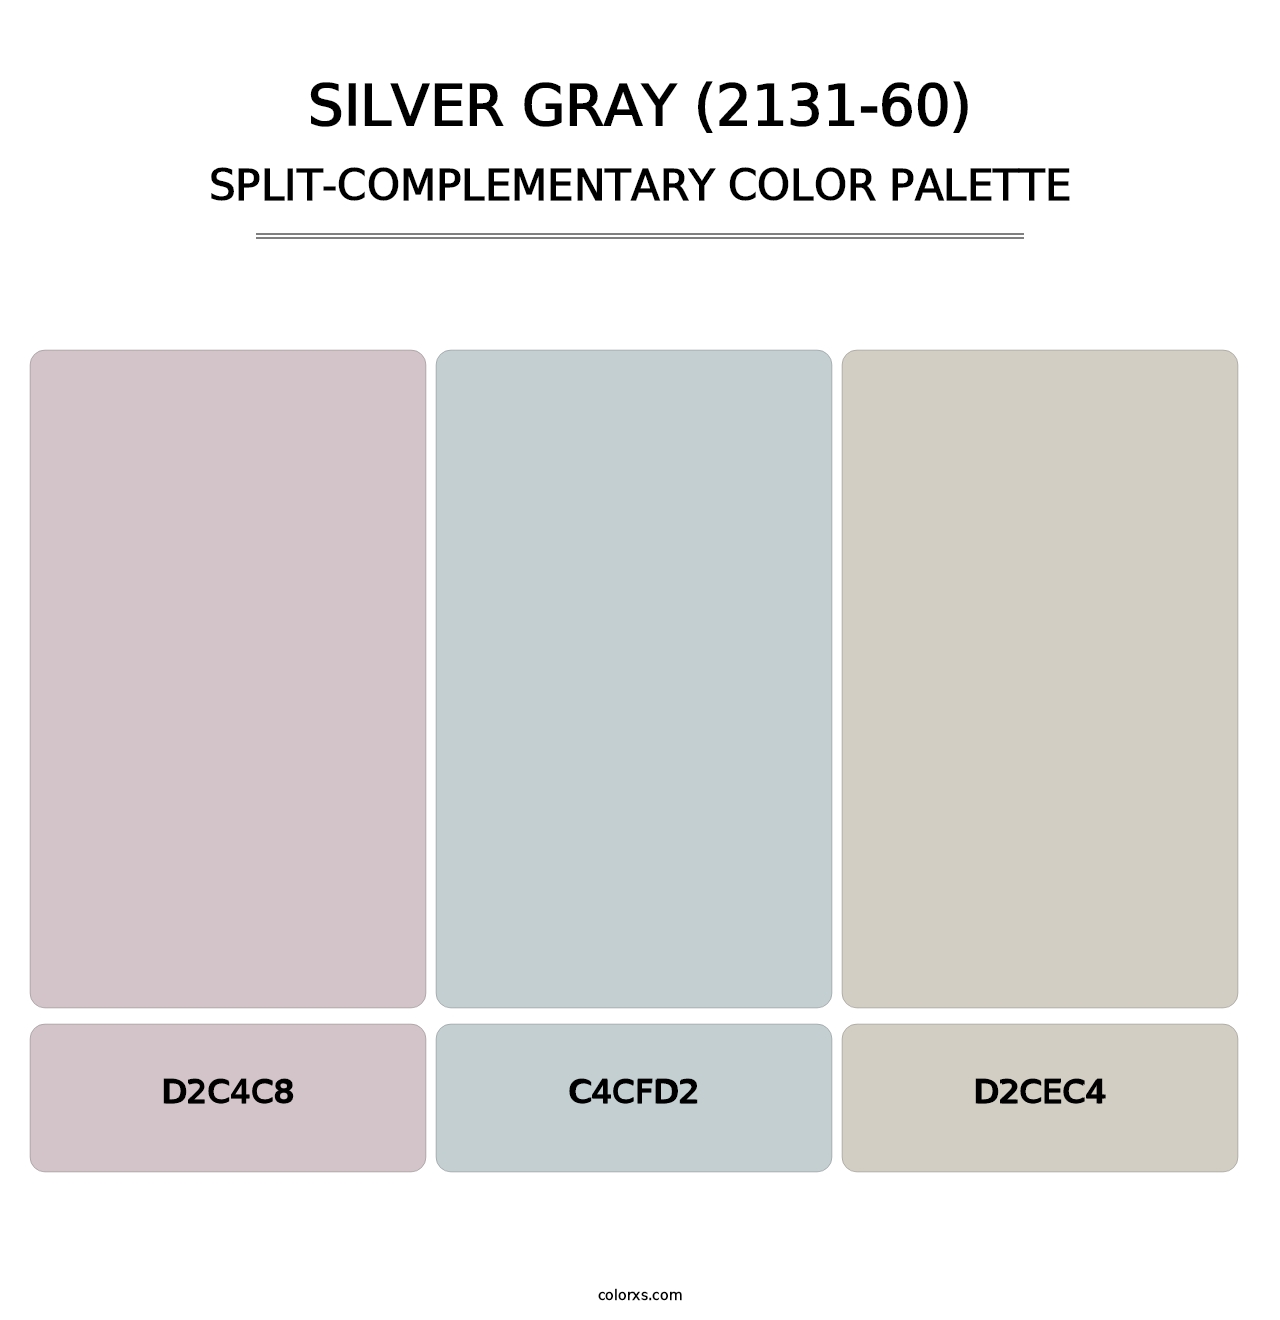 Silver Gray (2131-60) - Split-Complementary Color Palette